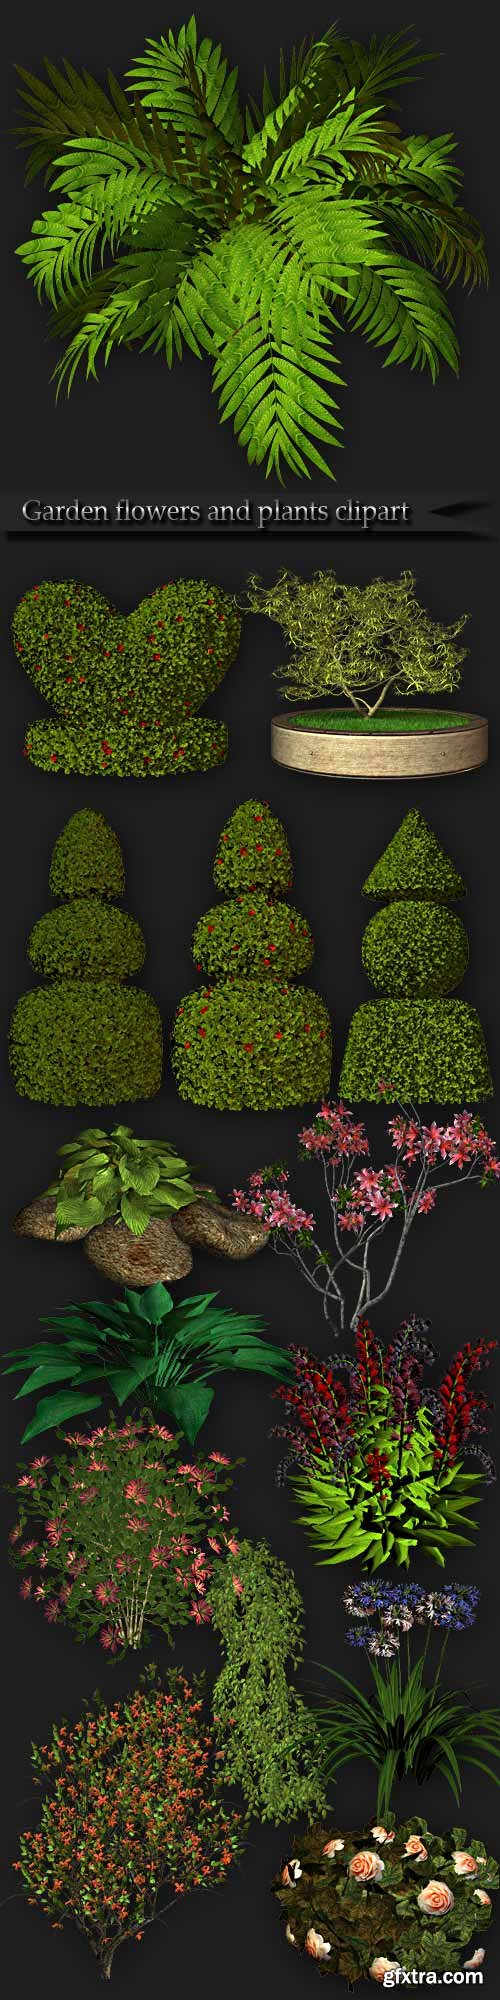 Garden flowers and plants clipart PNG